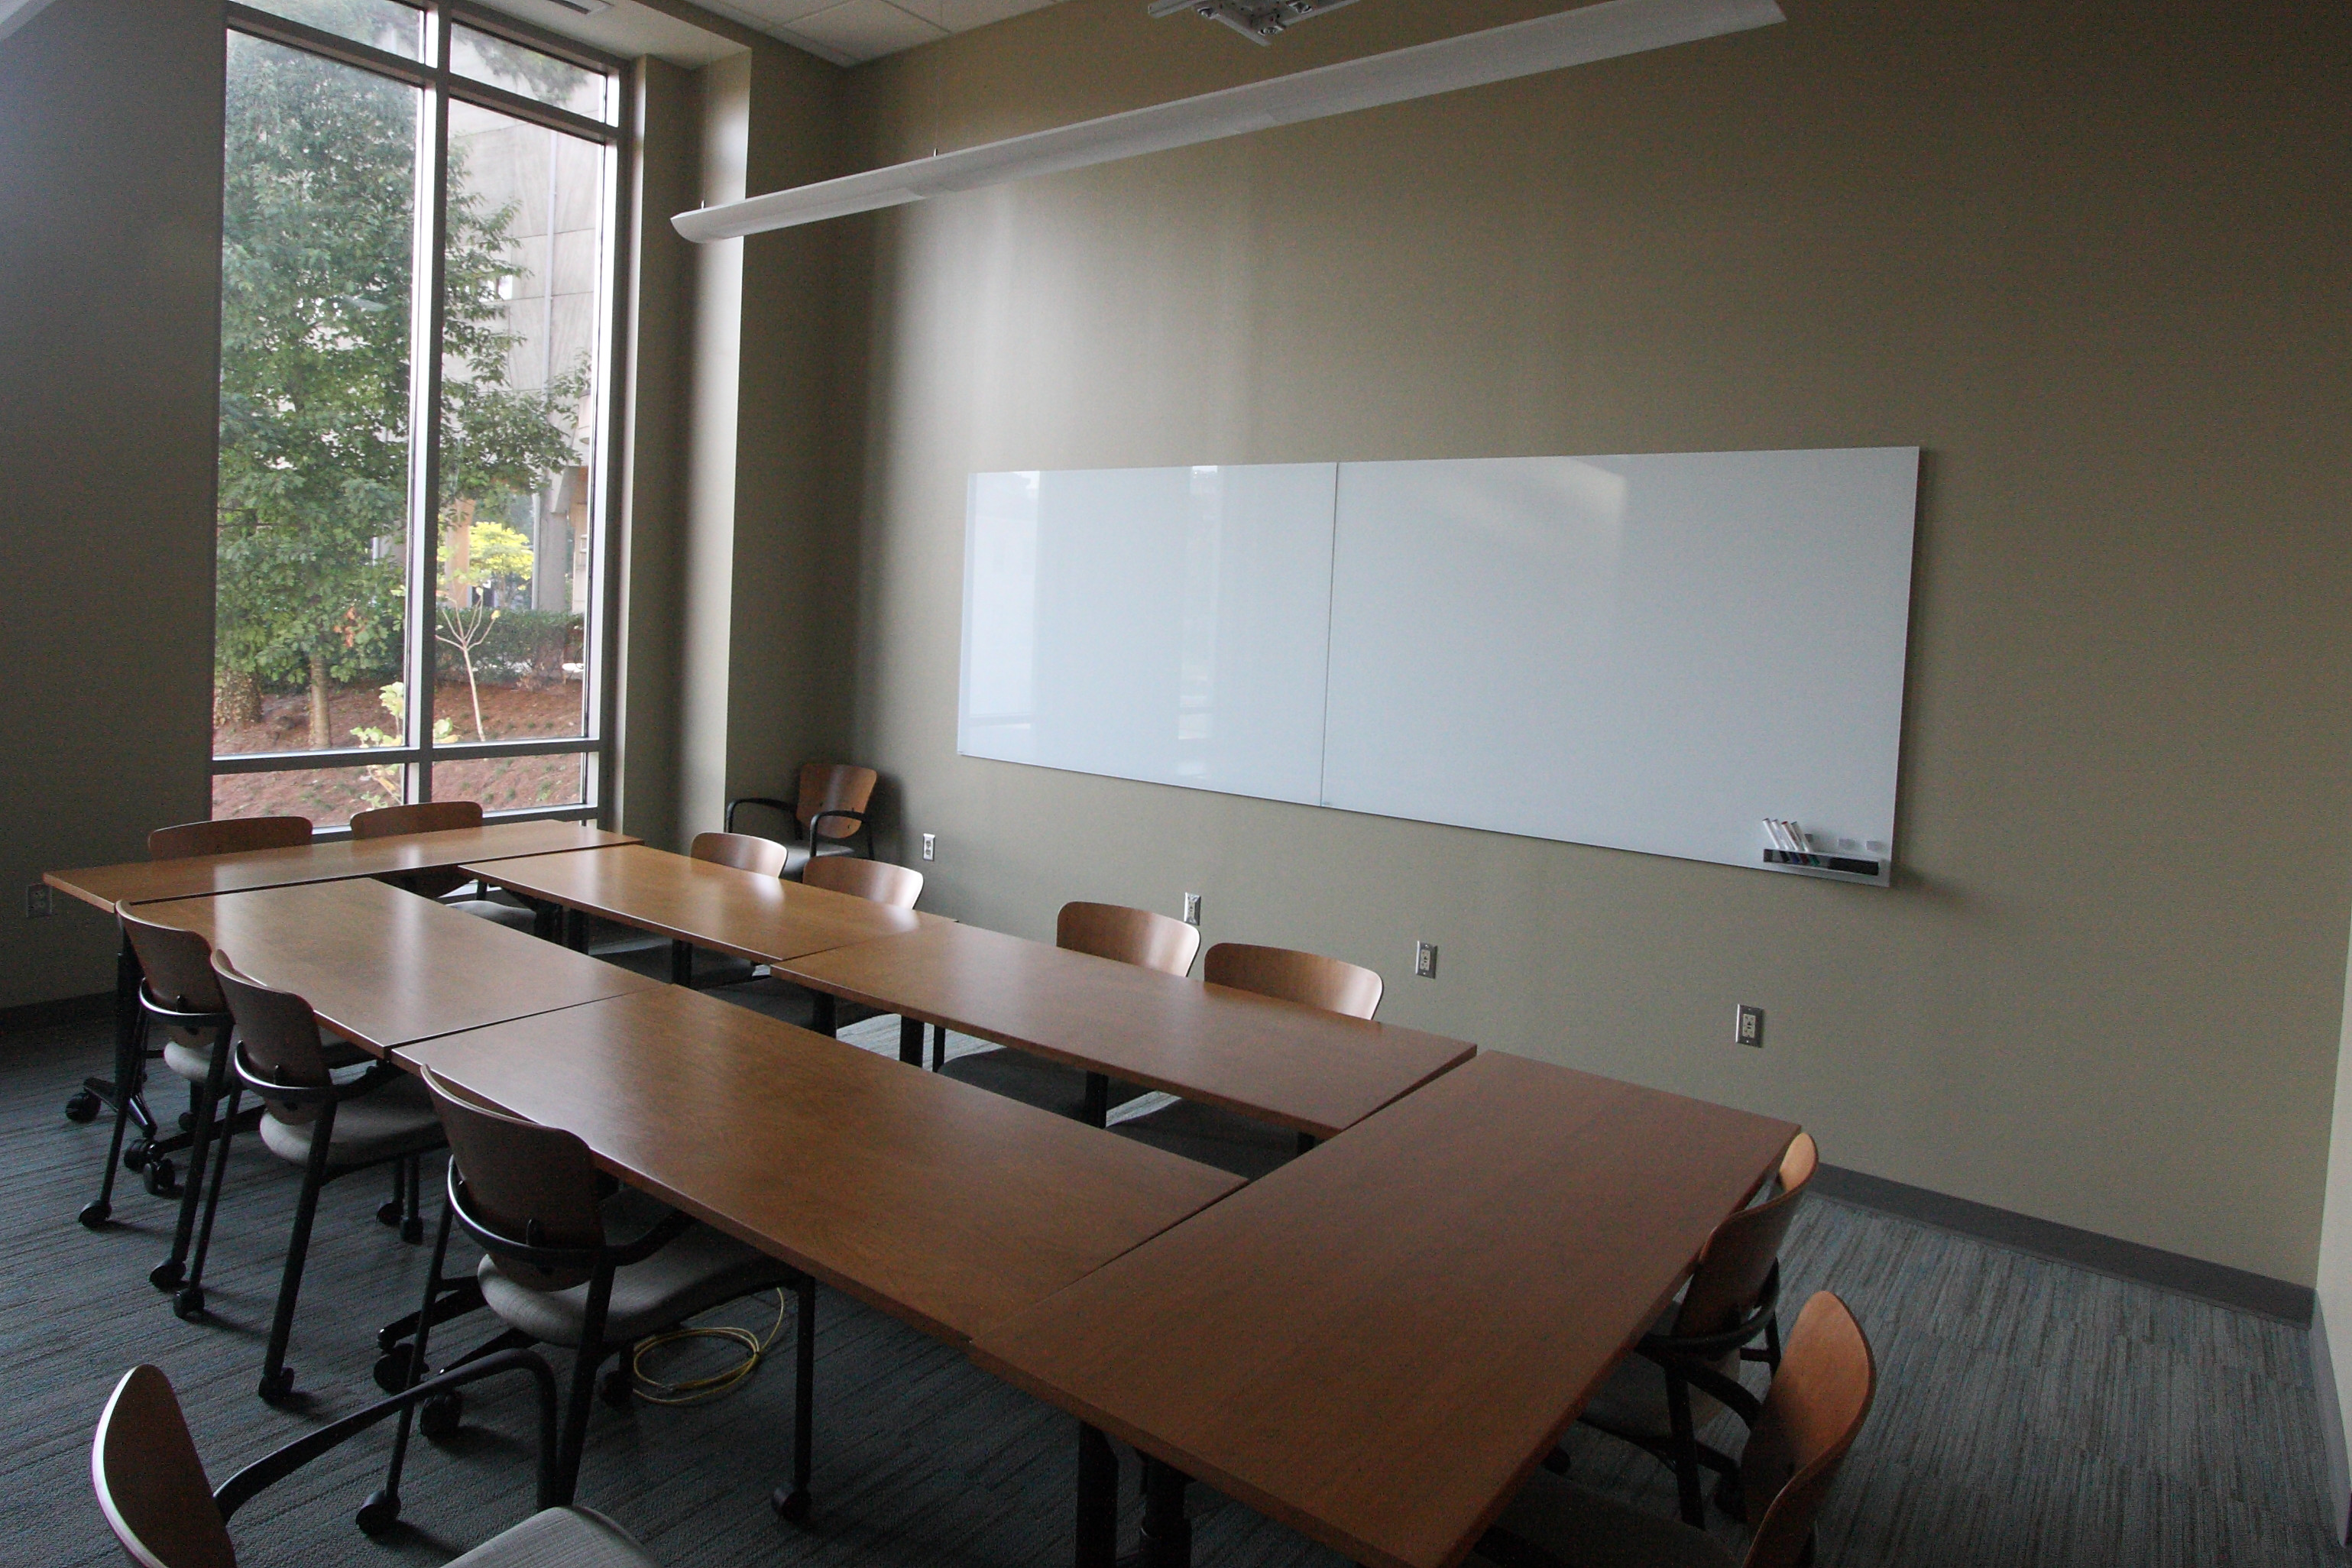 Large Group Study Room at Pitts